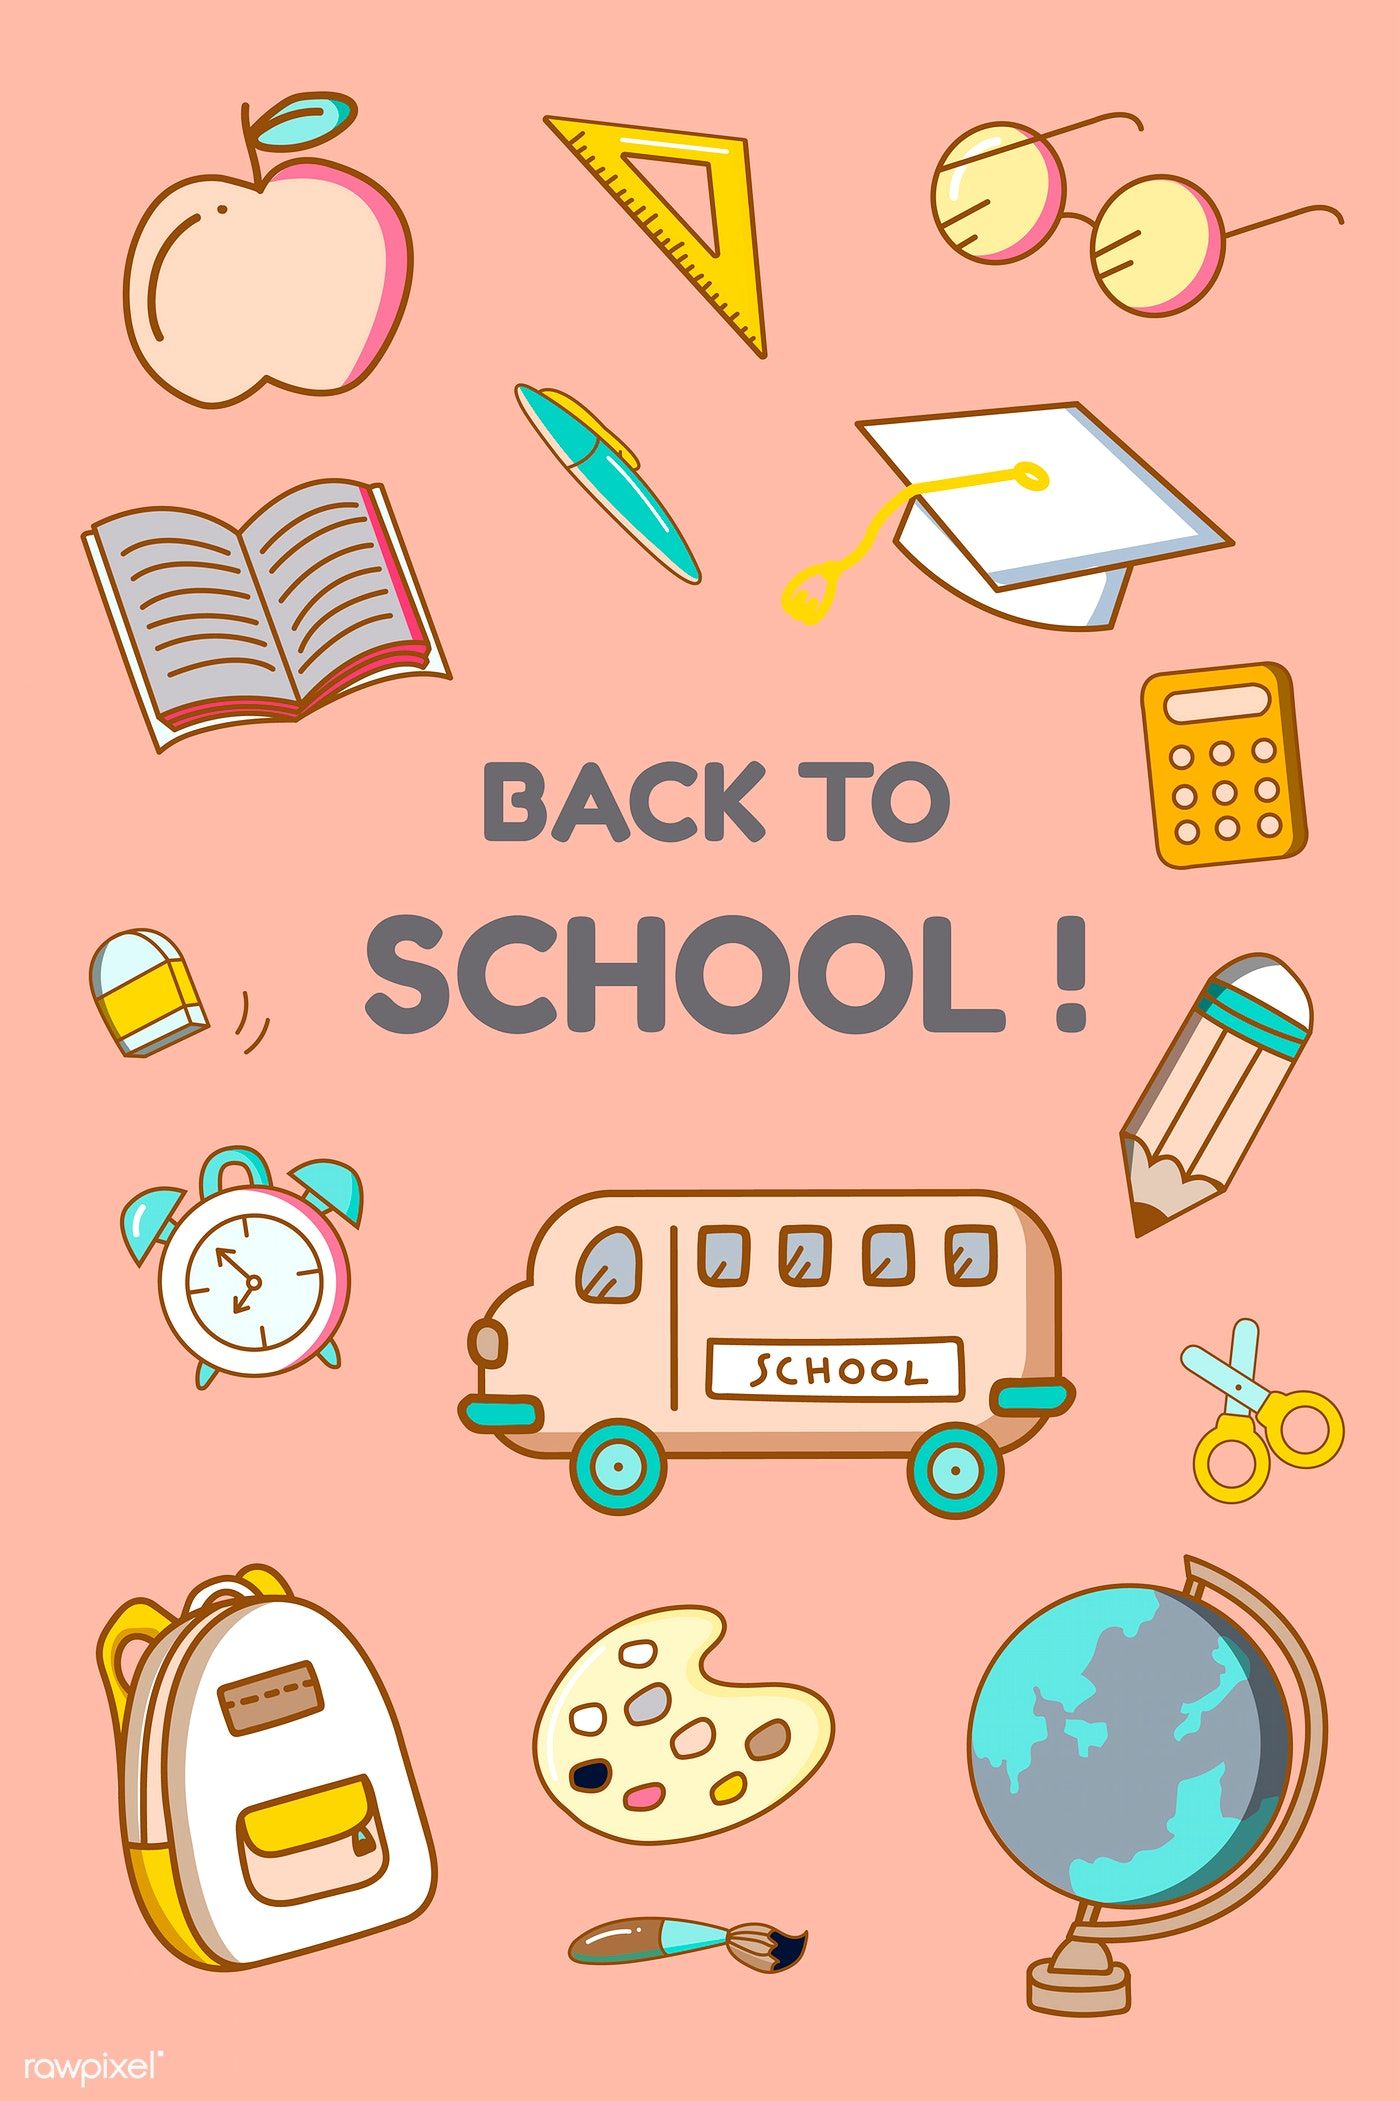 Back to school stationery vector. free image / nap. Back to school stationery, Back to school wallpaper, School stationery